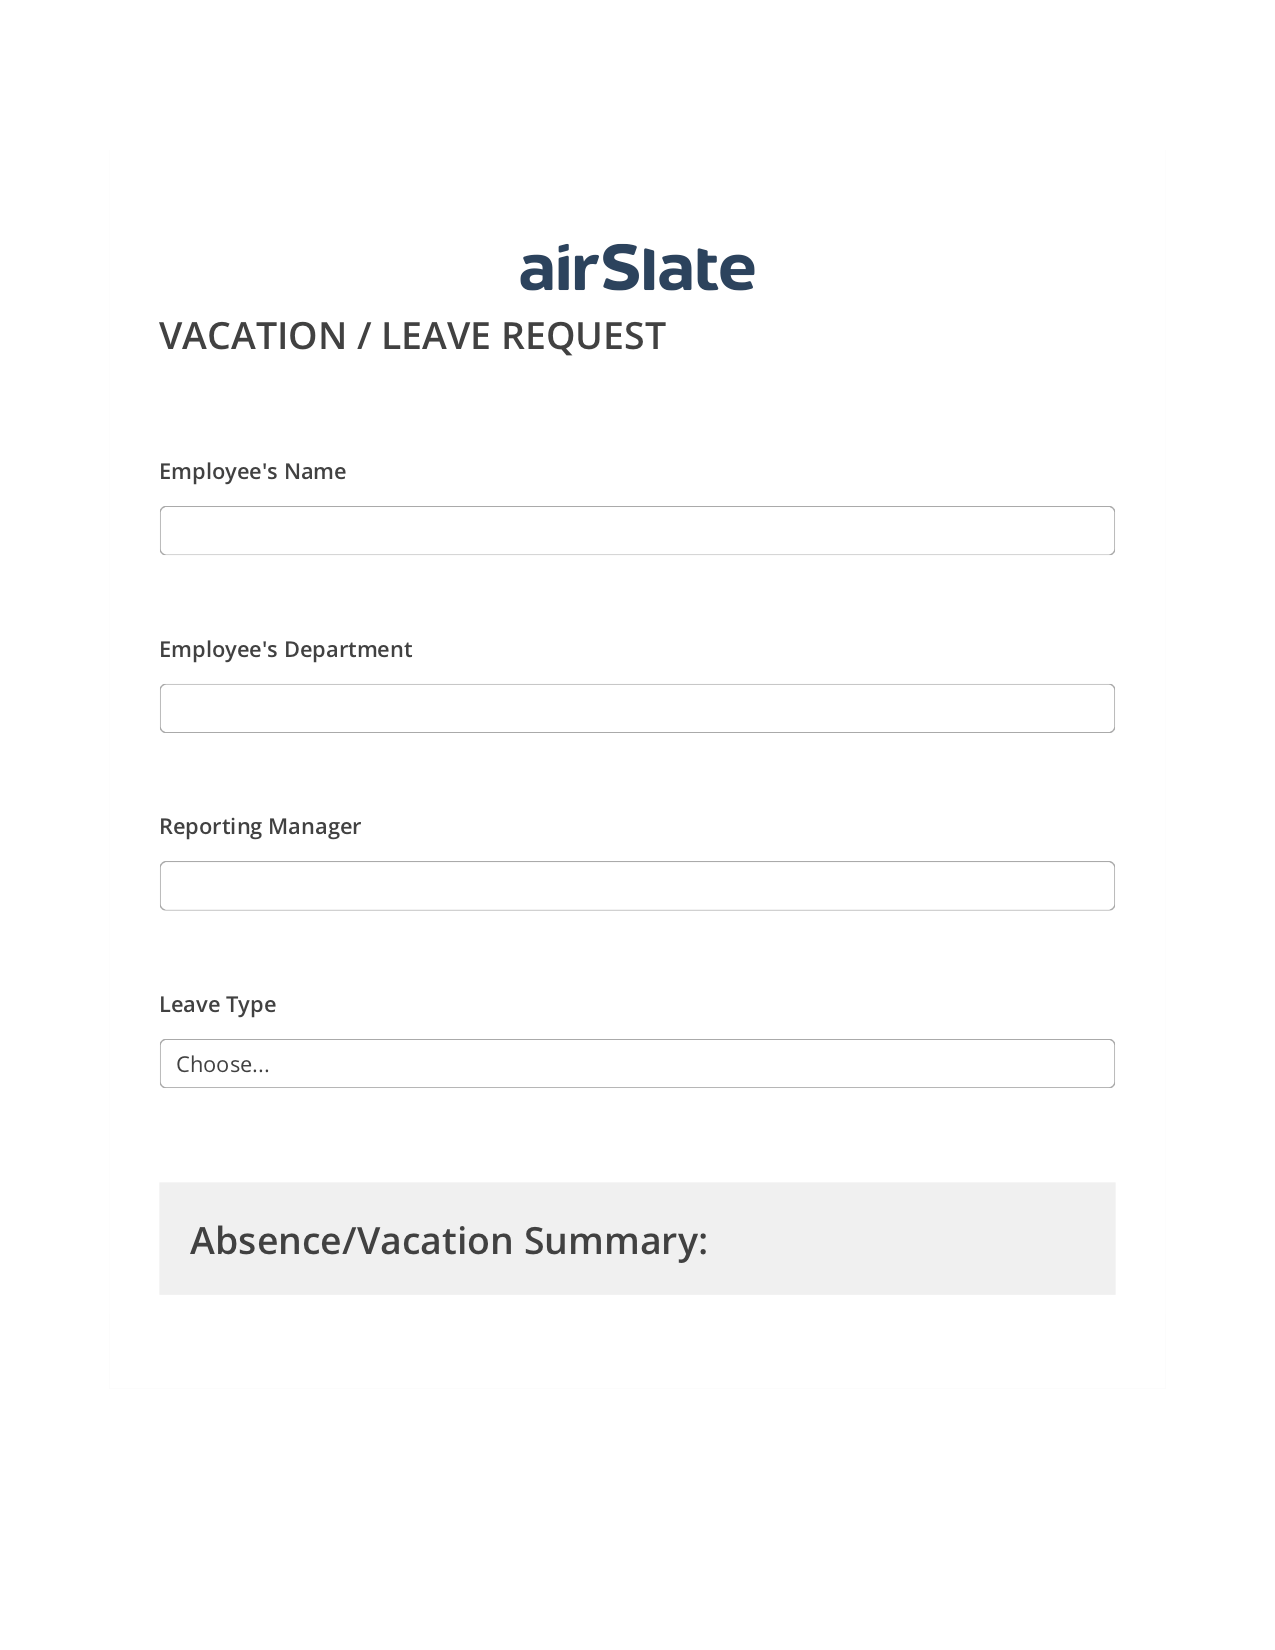 Vacation/Leave Request Workflow Pre-fill from MySQL Bot, SendGrid send Campaign bot, Archive to OneDrive Bot